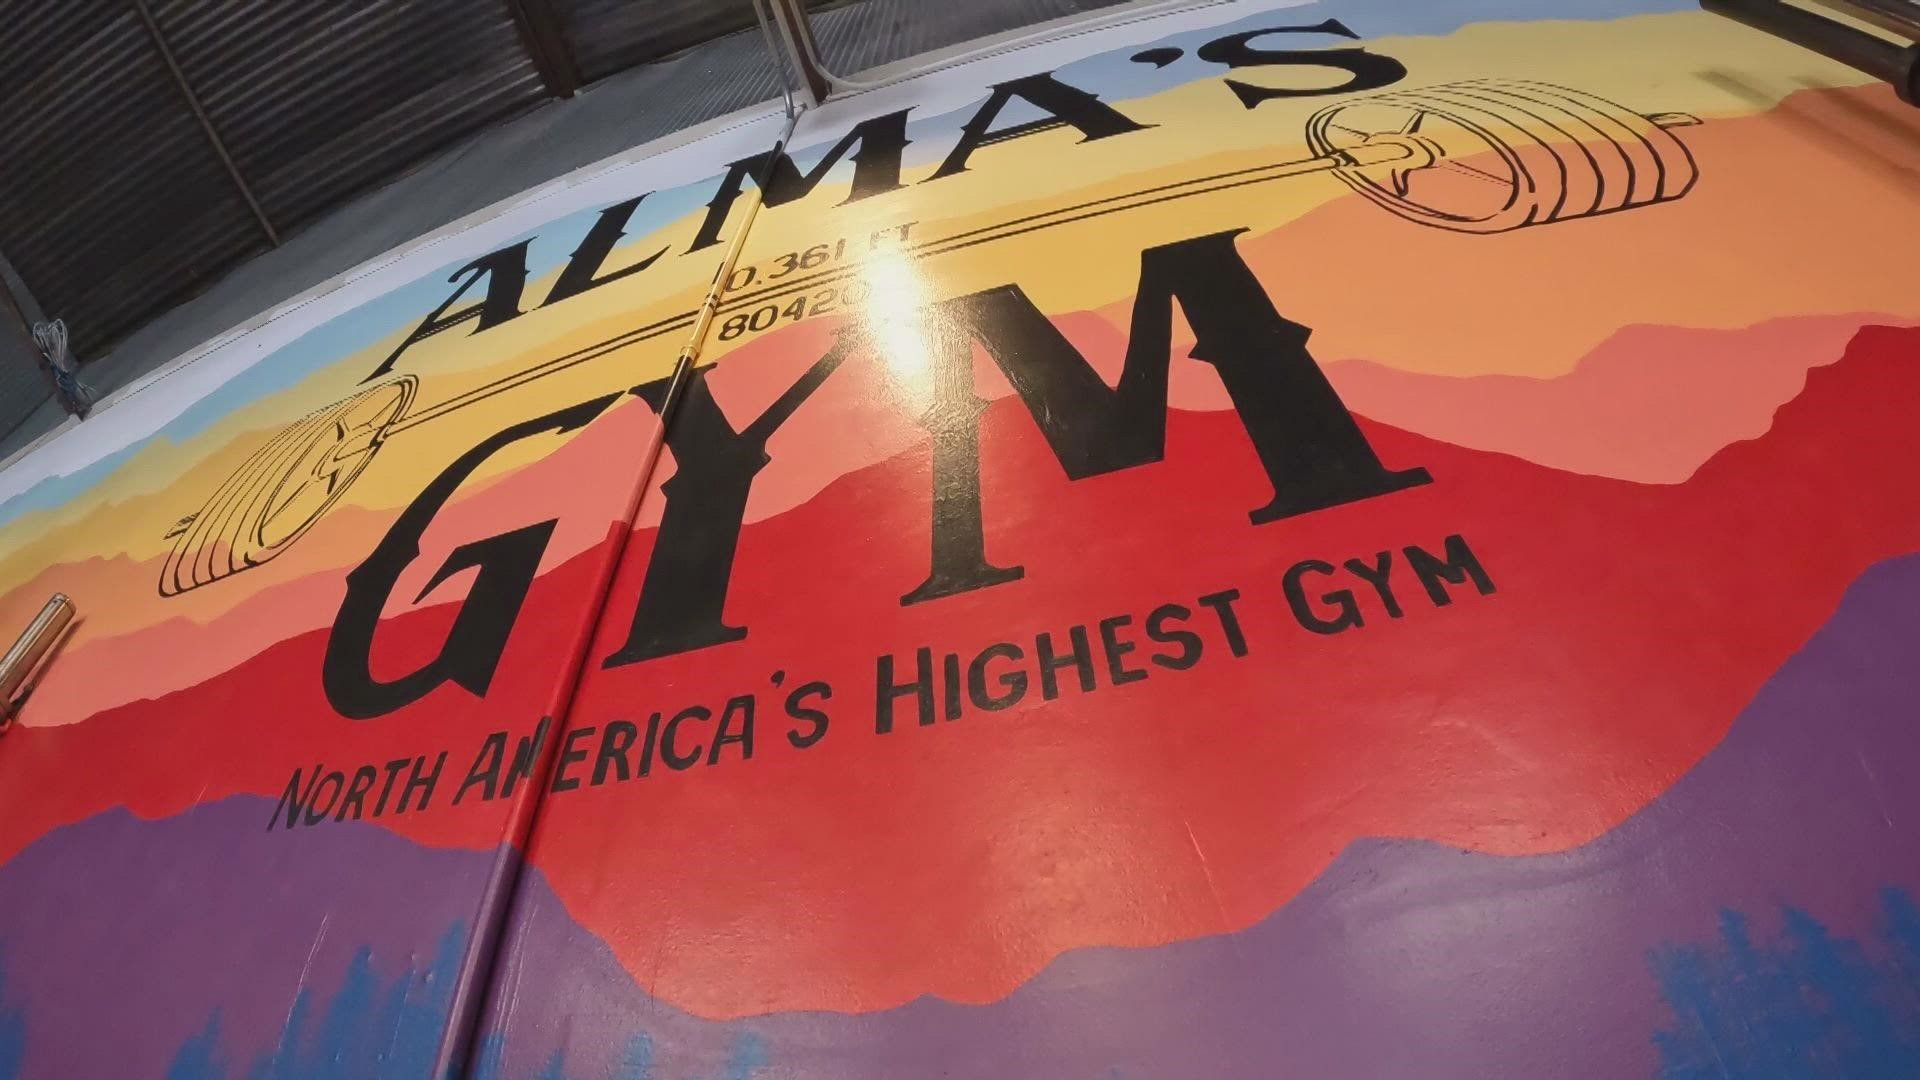 The newly opened Alma's Gym is located at 10,361 feet, making it the highest elevation gym in North America.